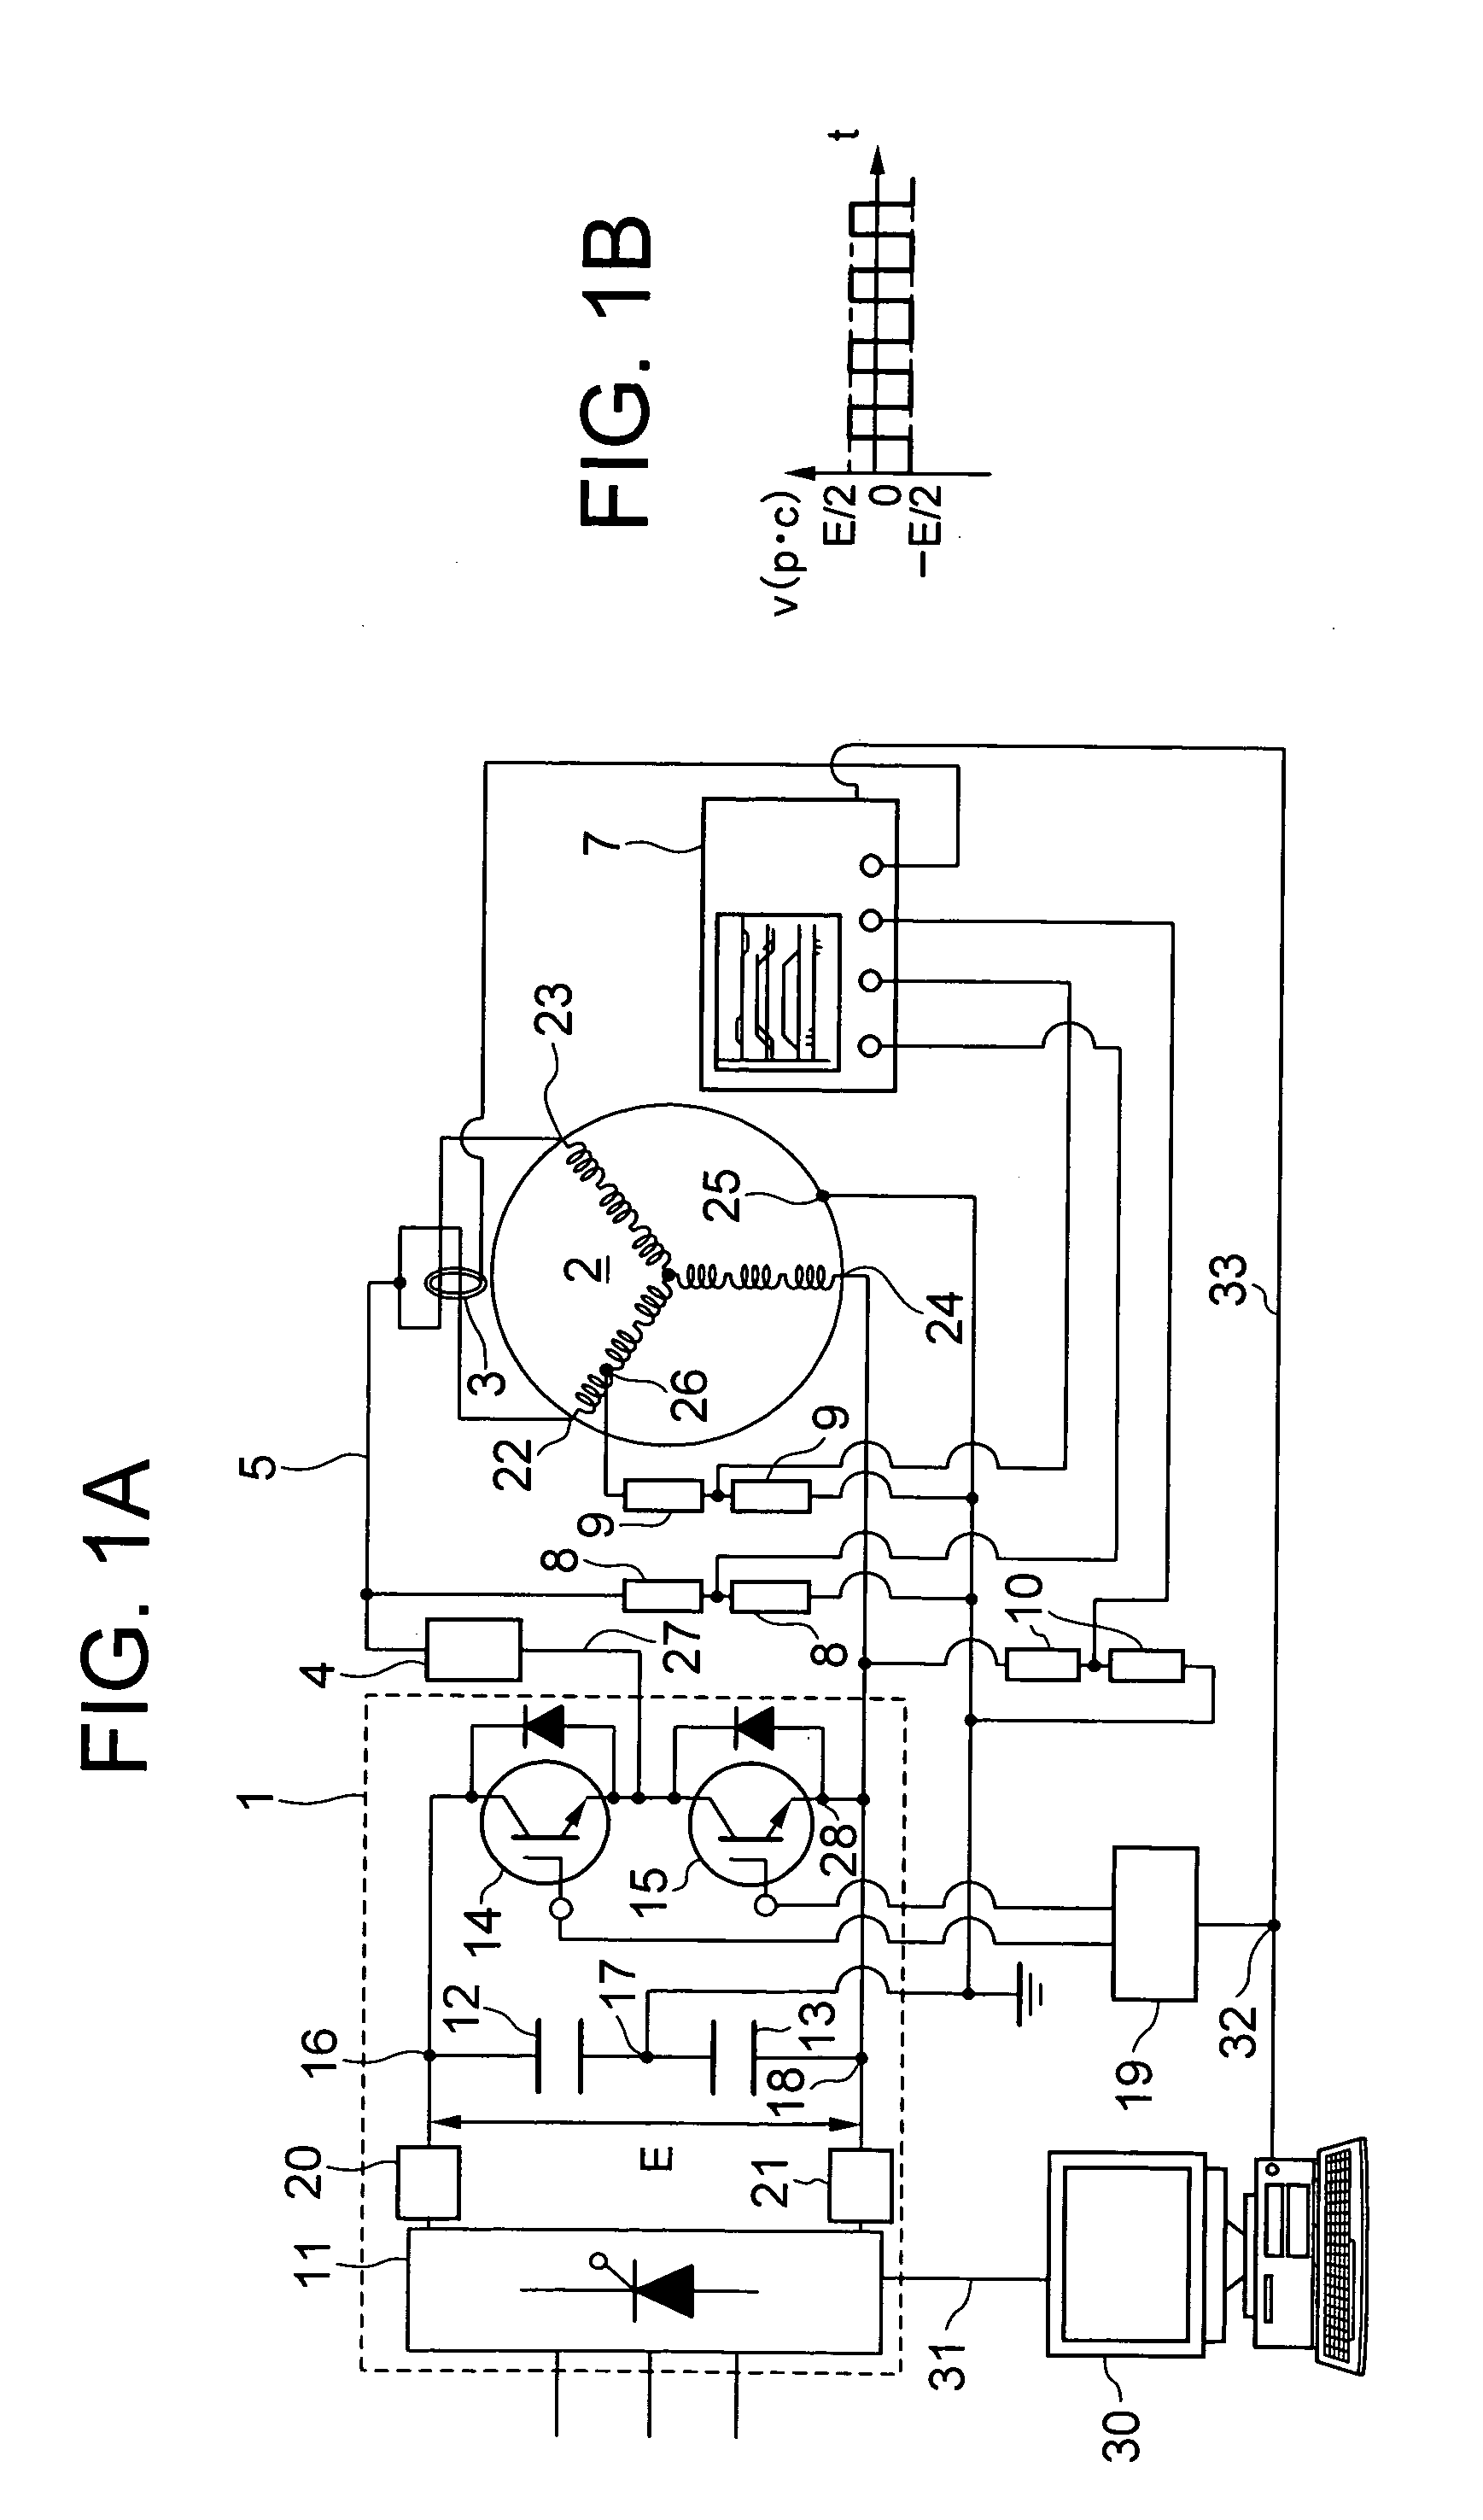 Apparatus for partial discharge detection of turn to turn insulation in motor